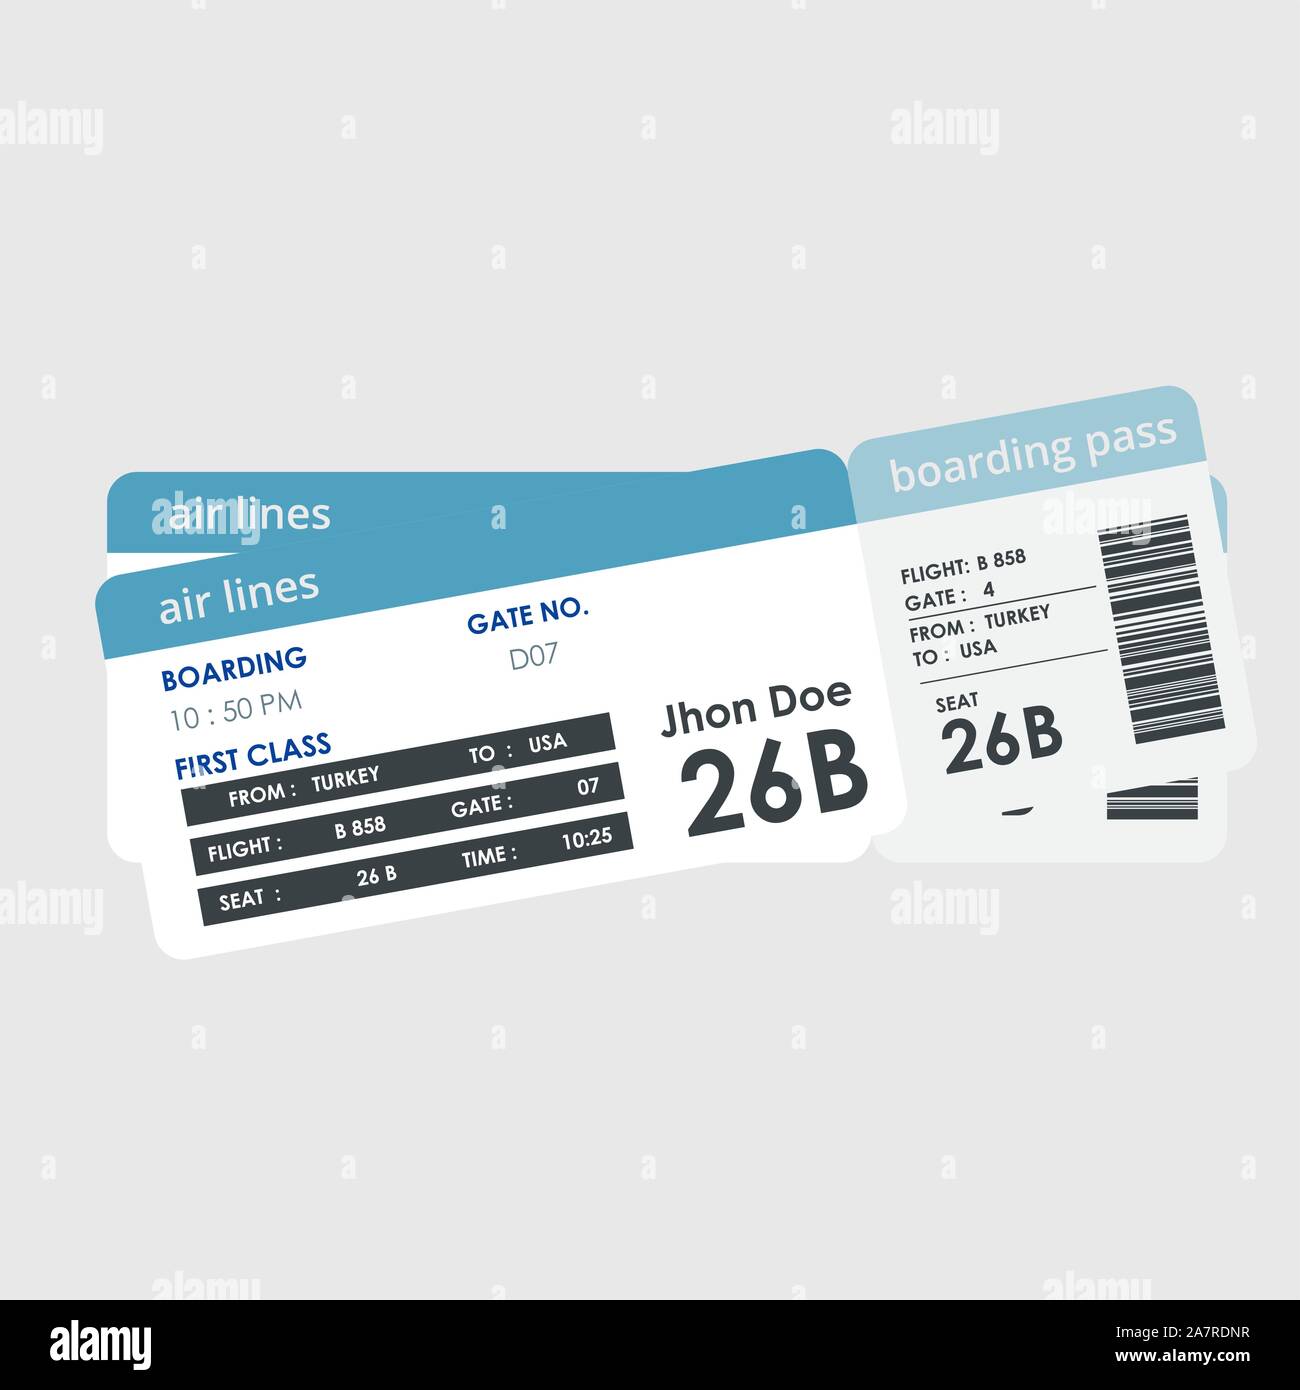 Airline boarding pass ticket. Concept template for travel, business trip or journey. Stock Vector